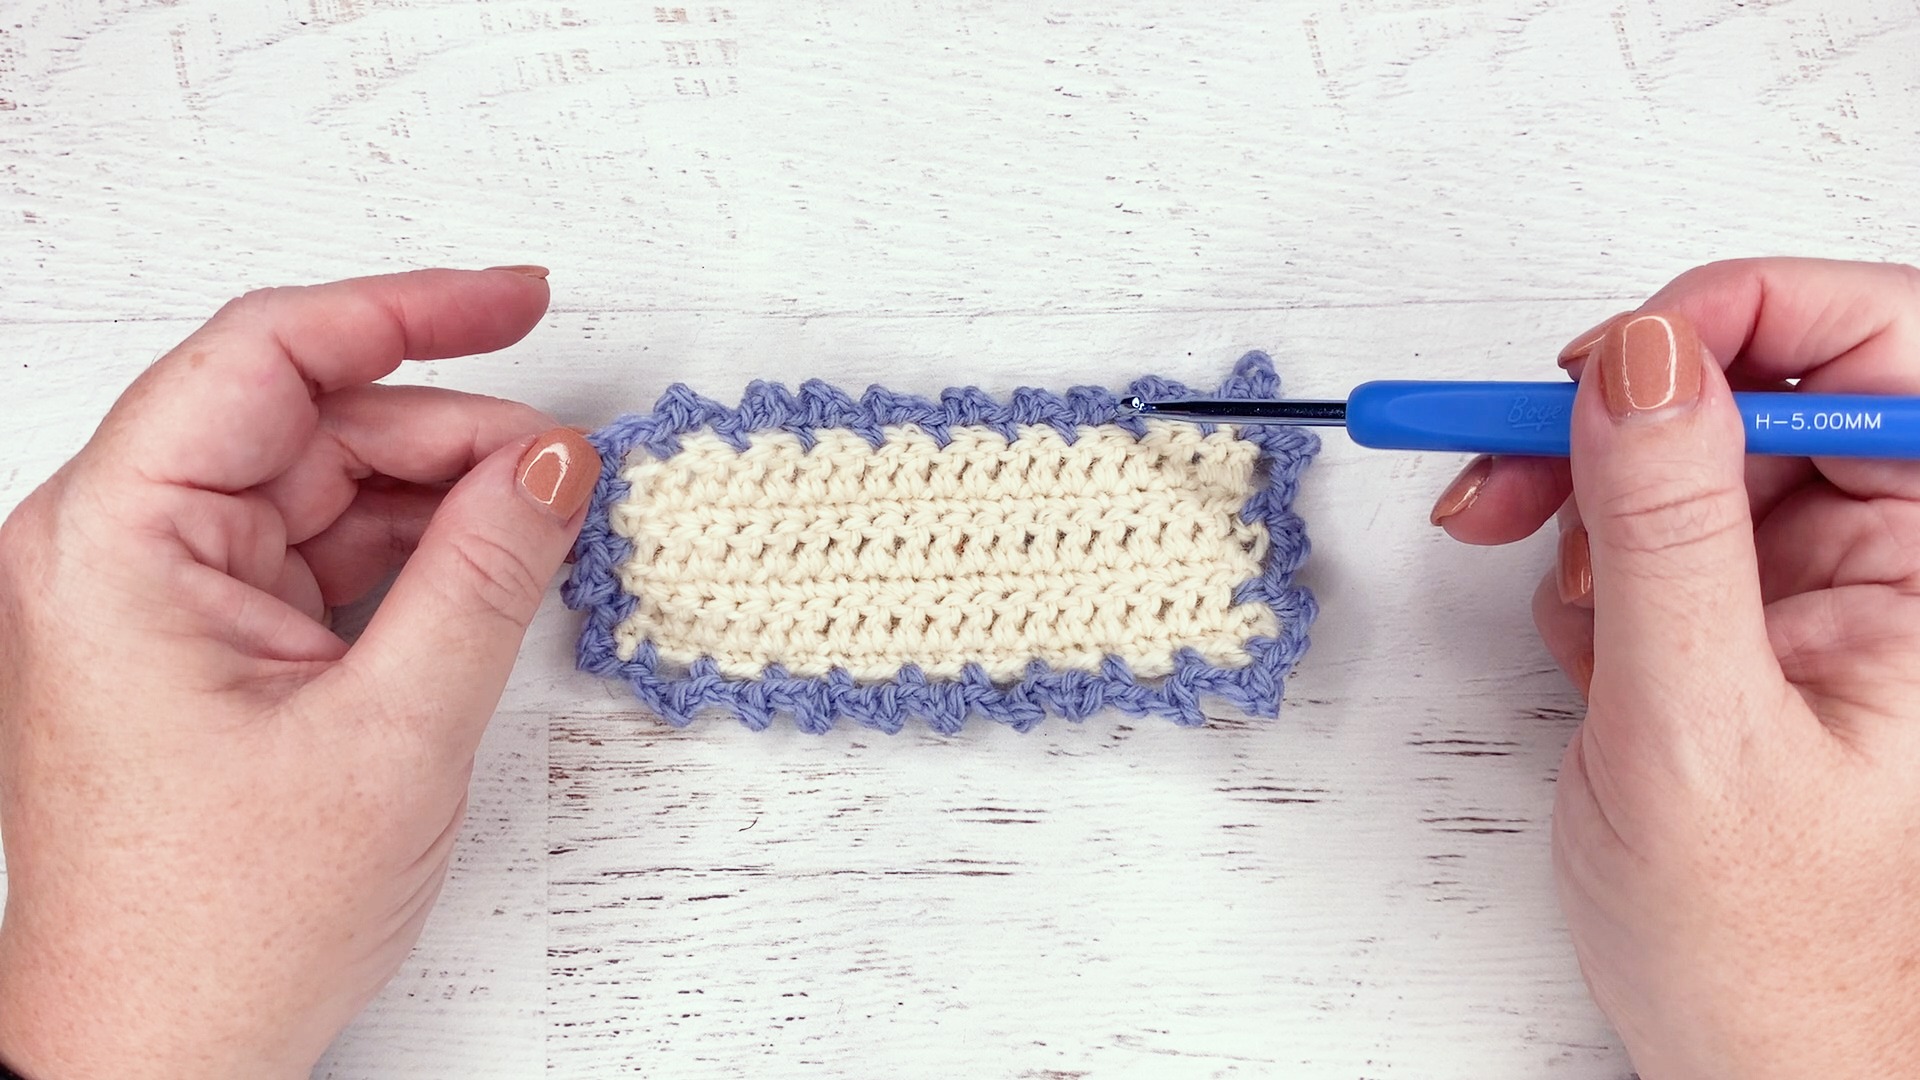 How to Do the Crochet Picot Stitch - CrochetNCrafts